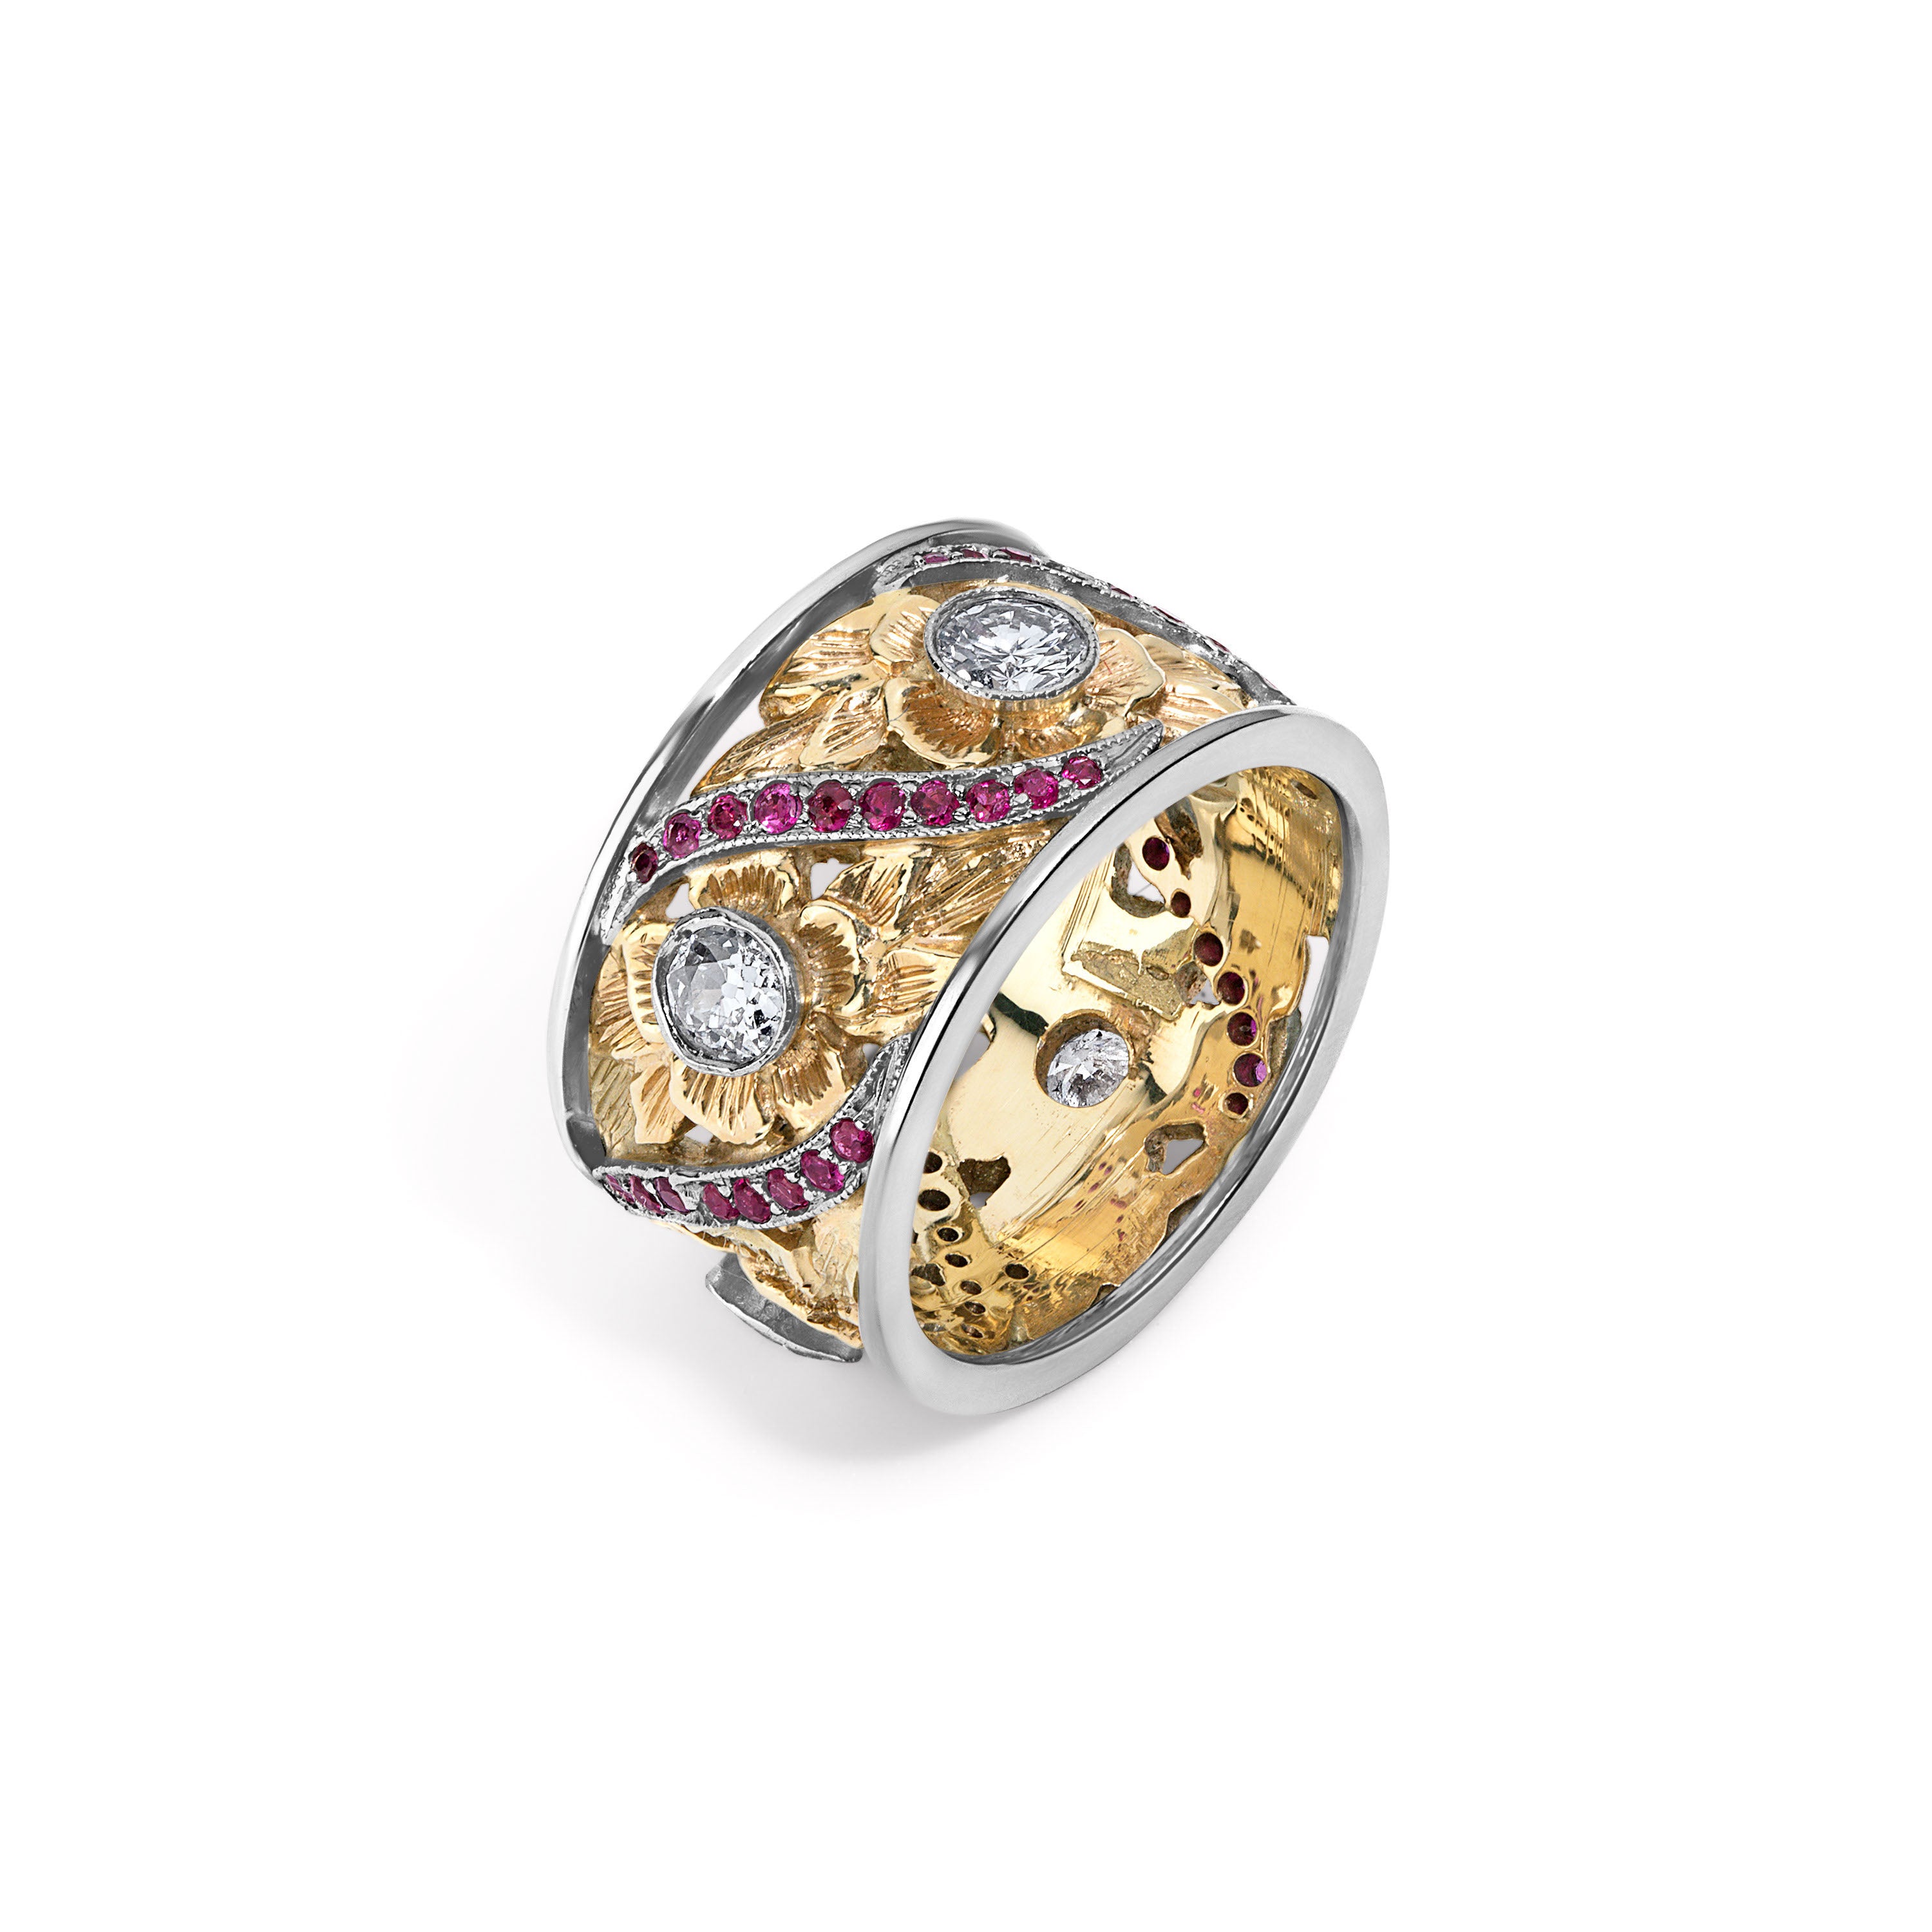 Floral Motif Band with Rubies and Old Mine Cut Diamonds